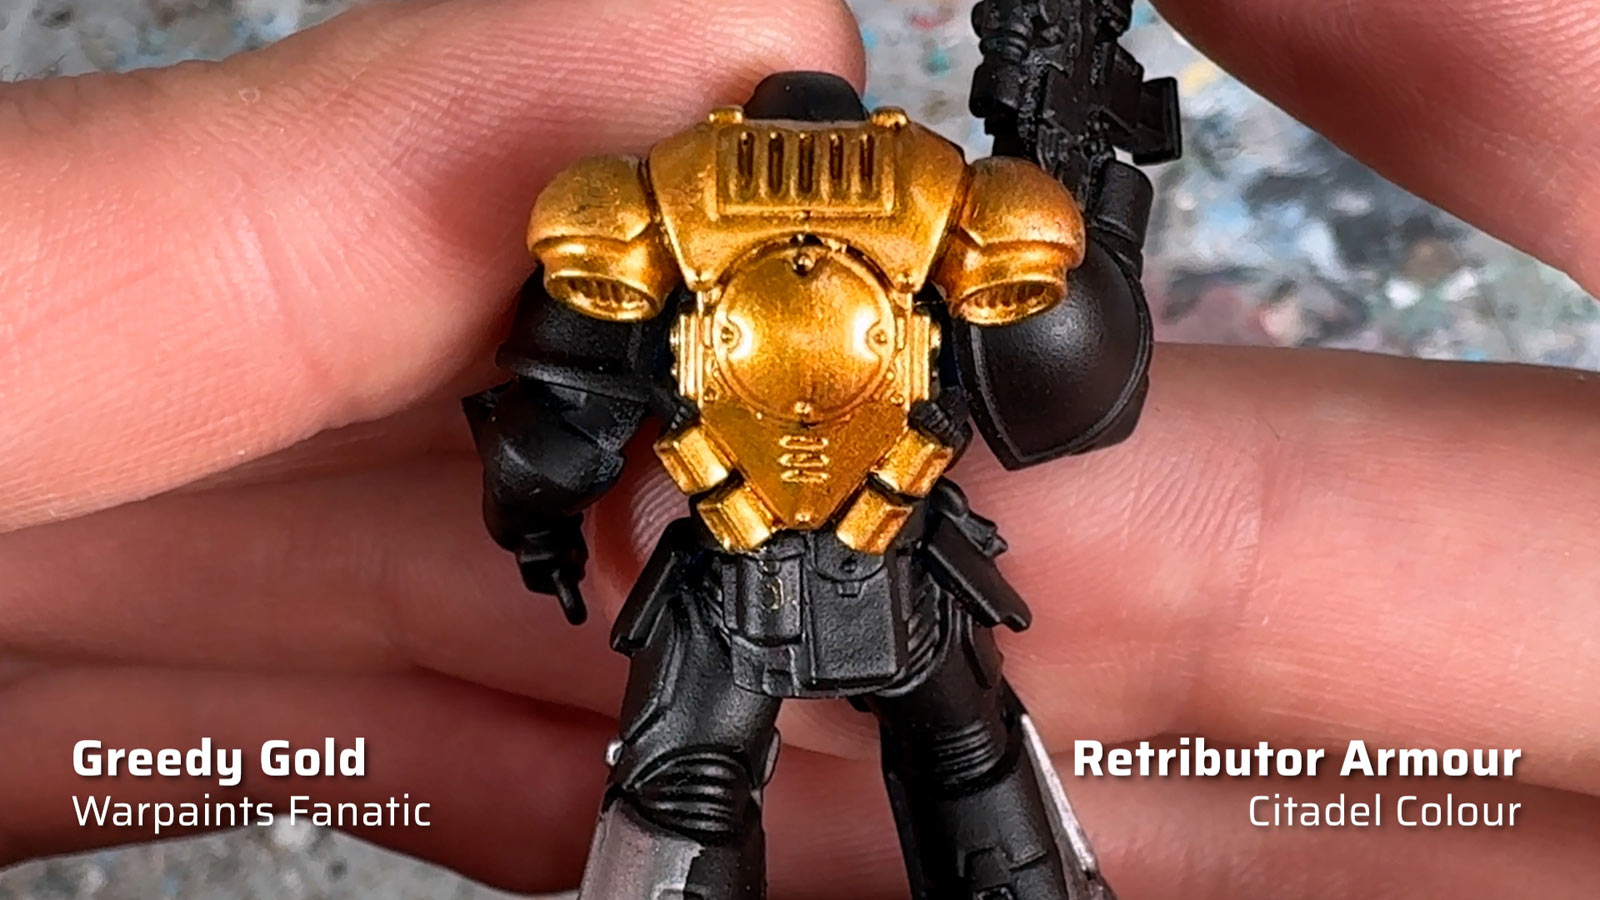 The Army Painter Warpaints Fanatic Greedy Gold and Retributor Armour comparison and review